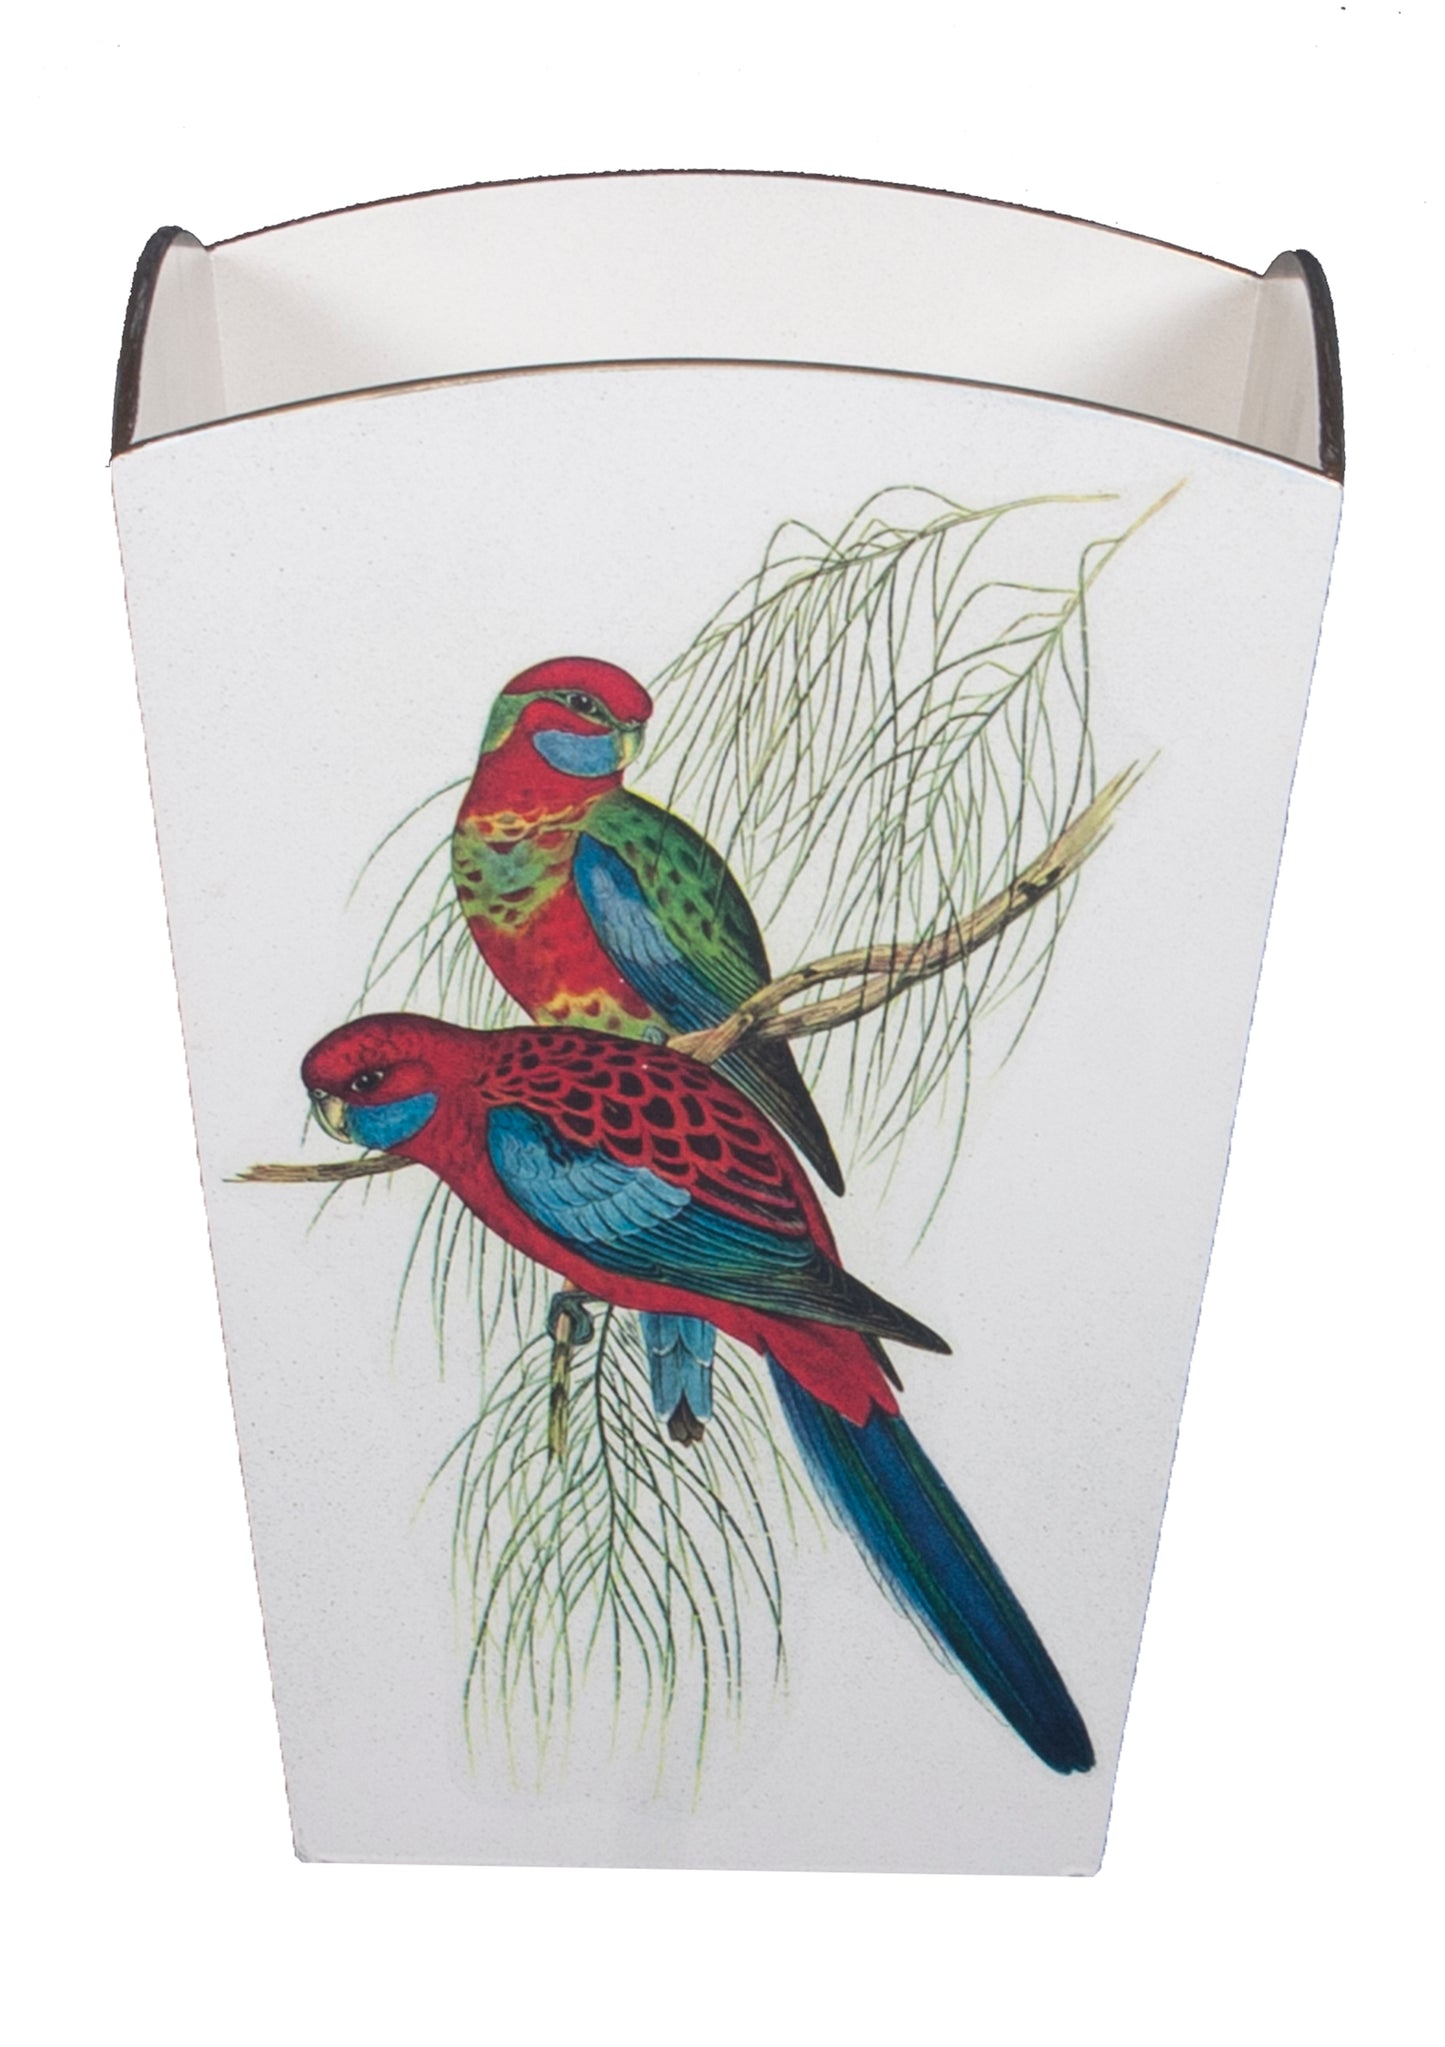 Square Wooden Waste Paper Bin: Pair of Parrots